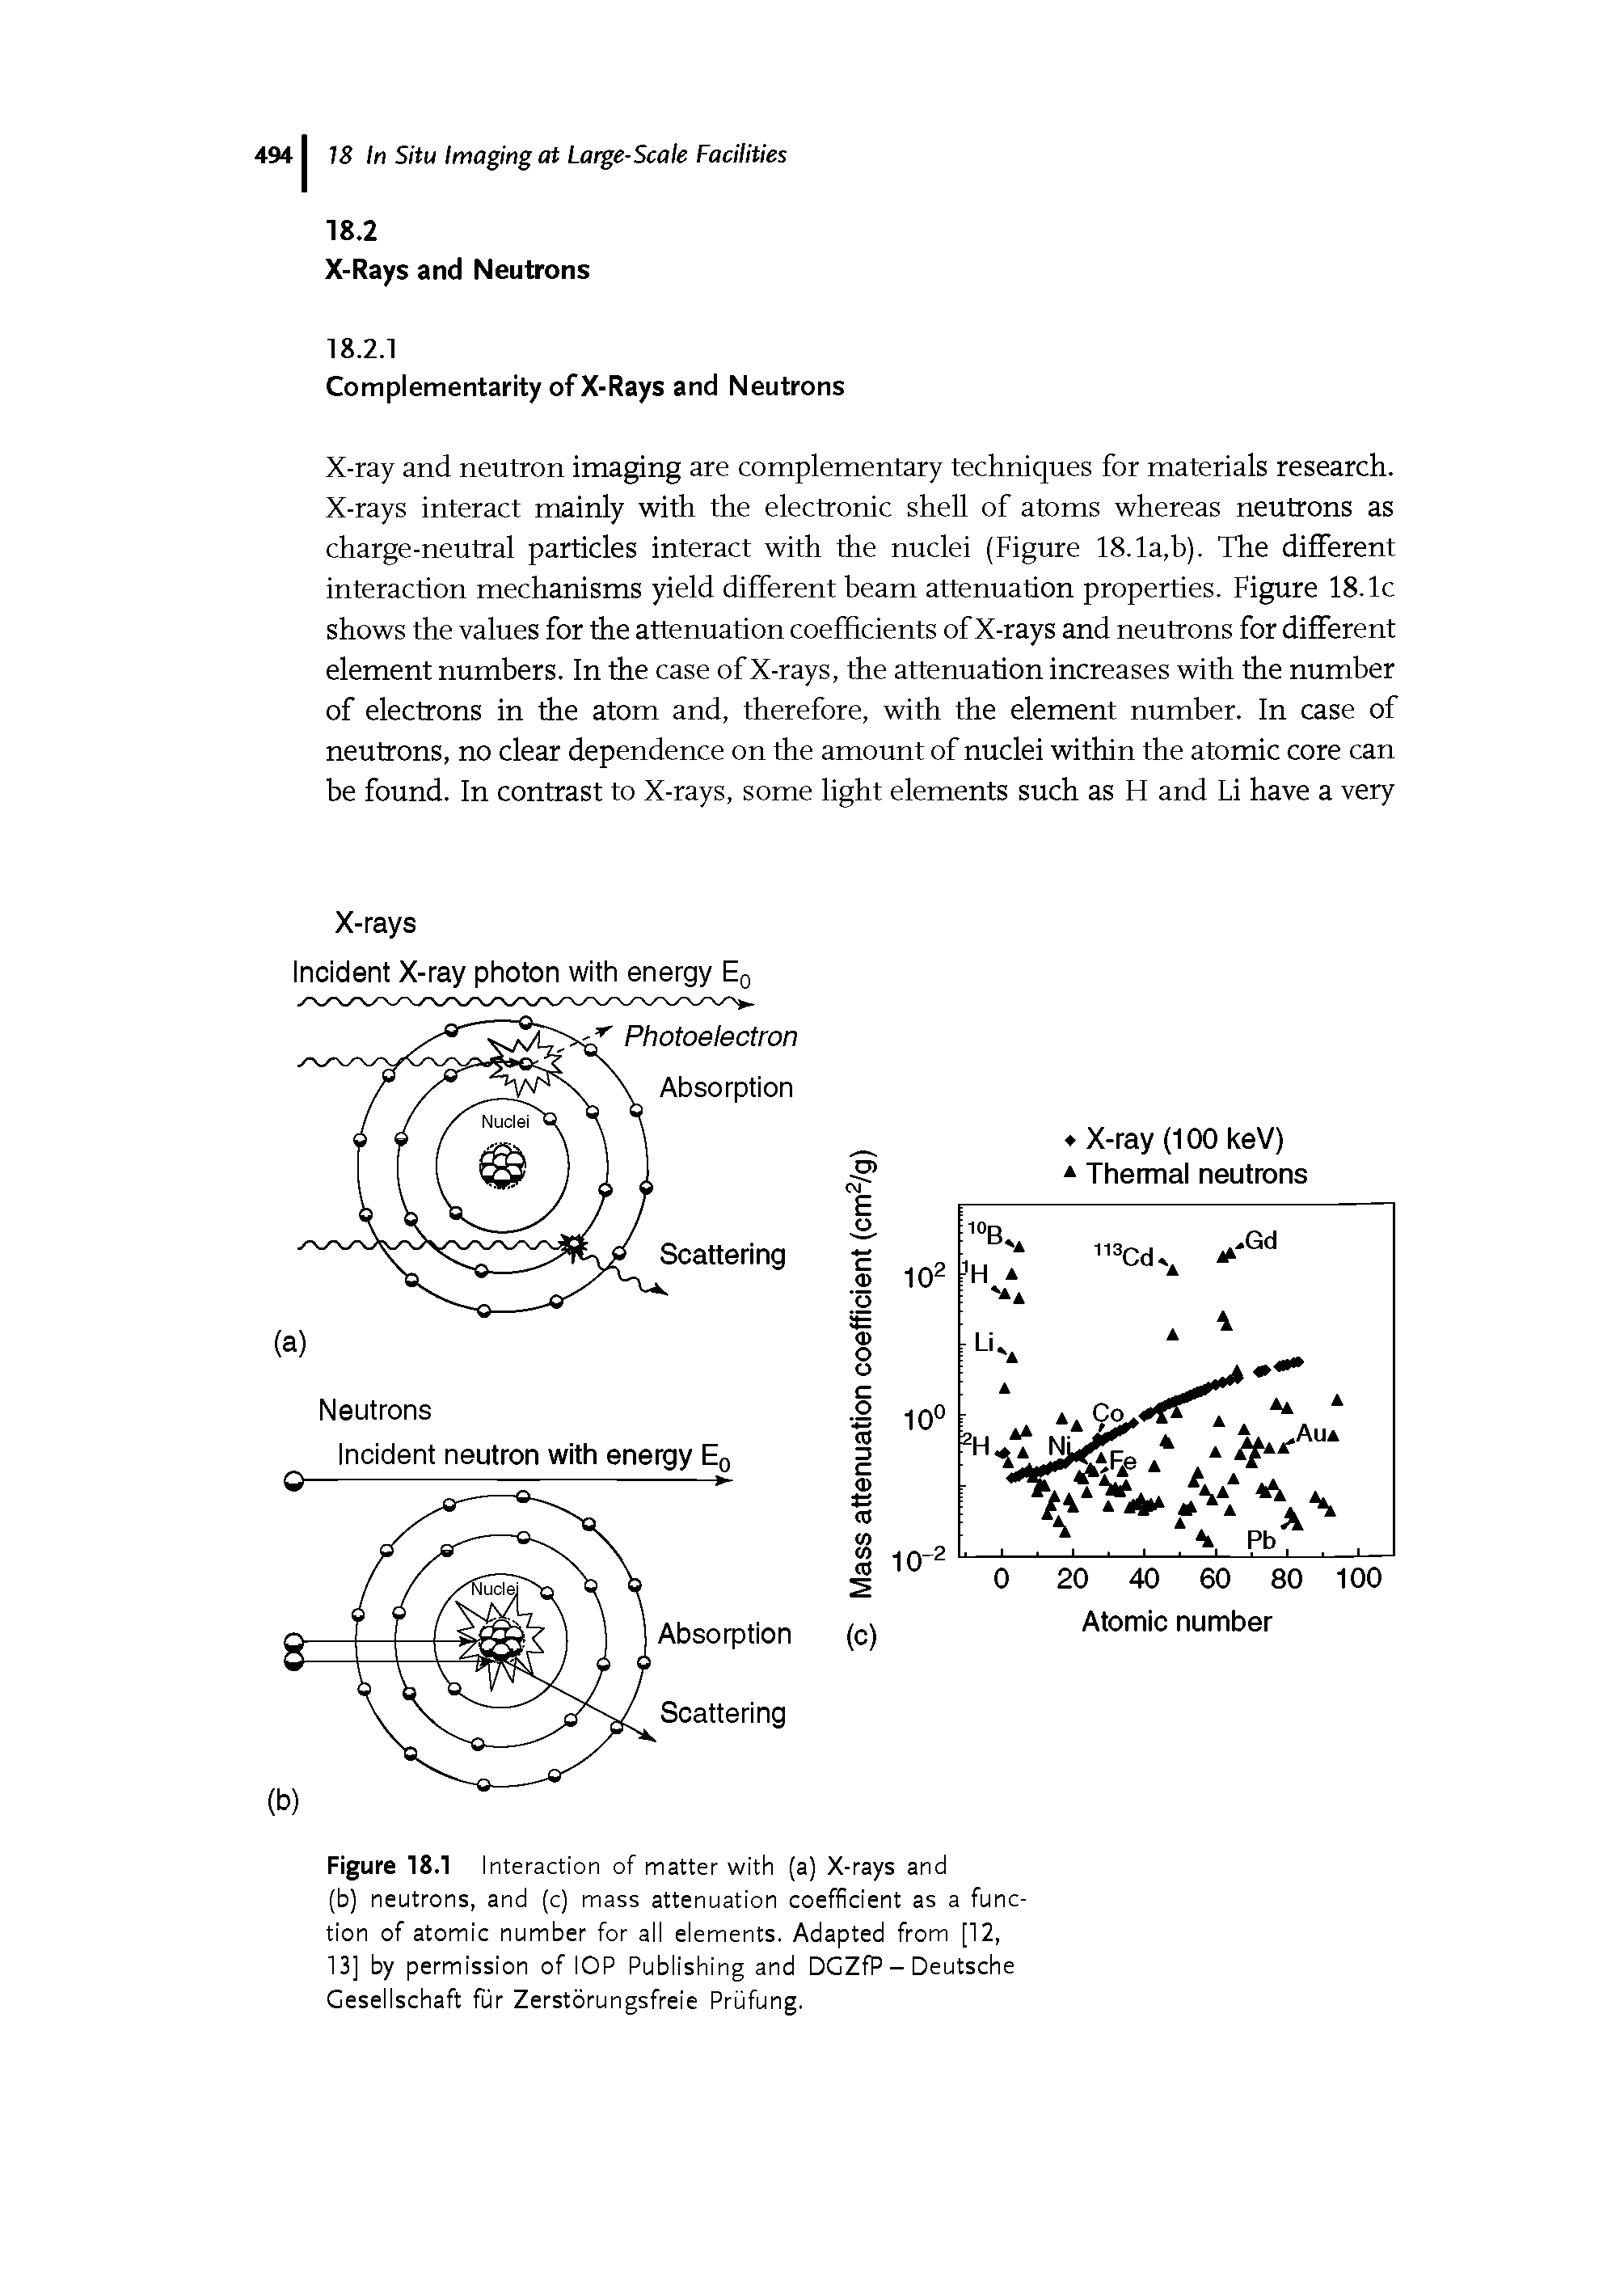 Figure 18.1 Interaction of matter with (a) X-rays and (b) neutrons, and (c) mass attenuation coefficient as a function of atomic number for all elements. Adapted from [12, 13] by permission of lOP Publishing and DCZfP - Deutsche Gesellschaft fur Zerstorungsfreie Prufung.